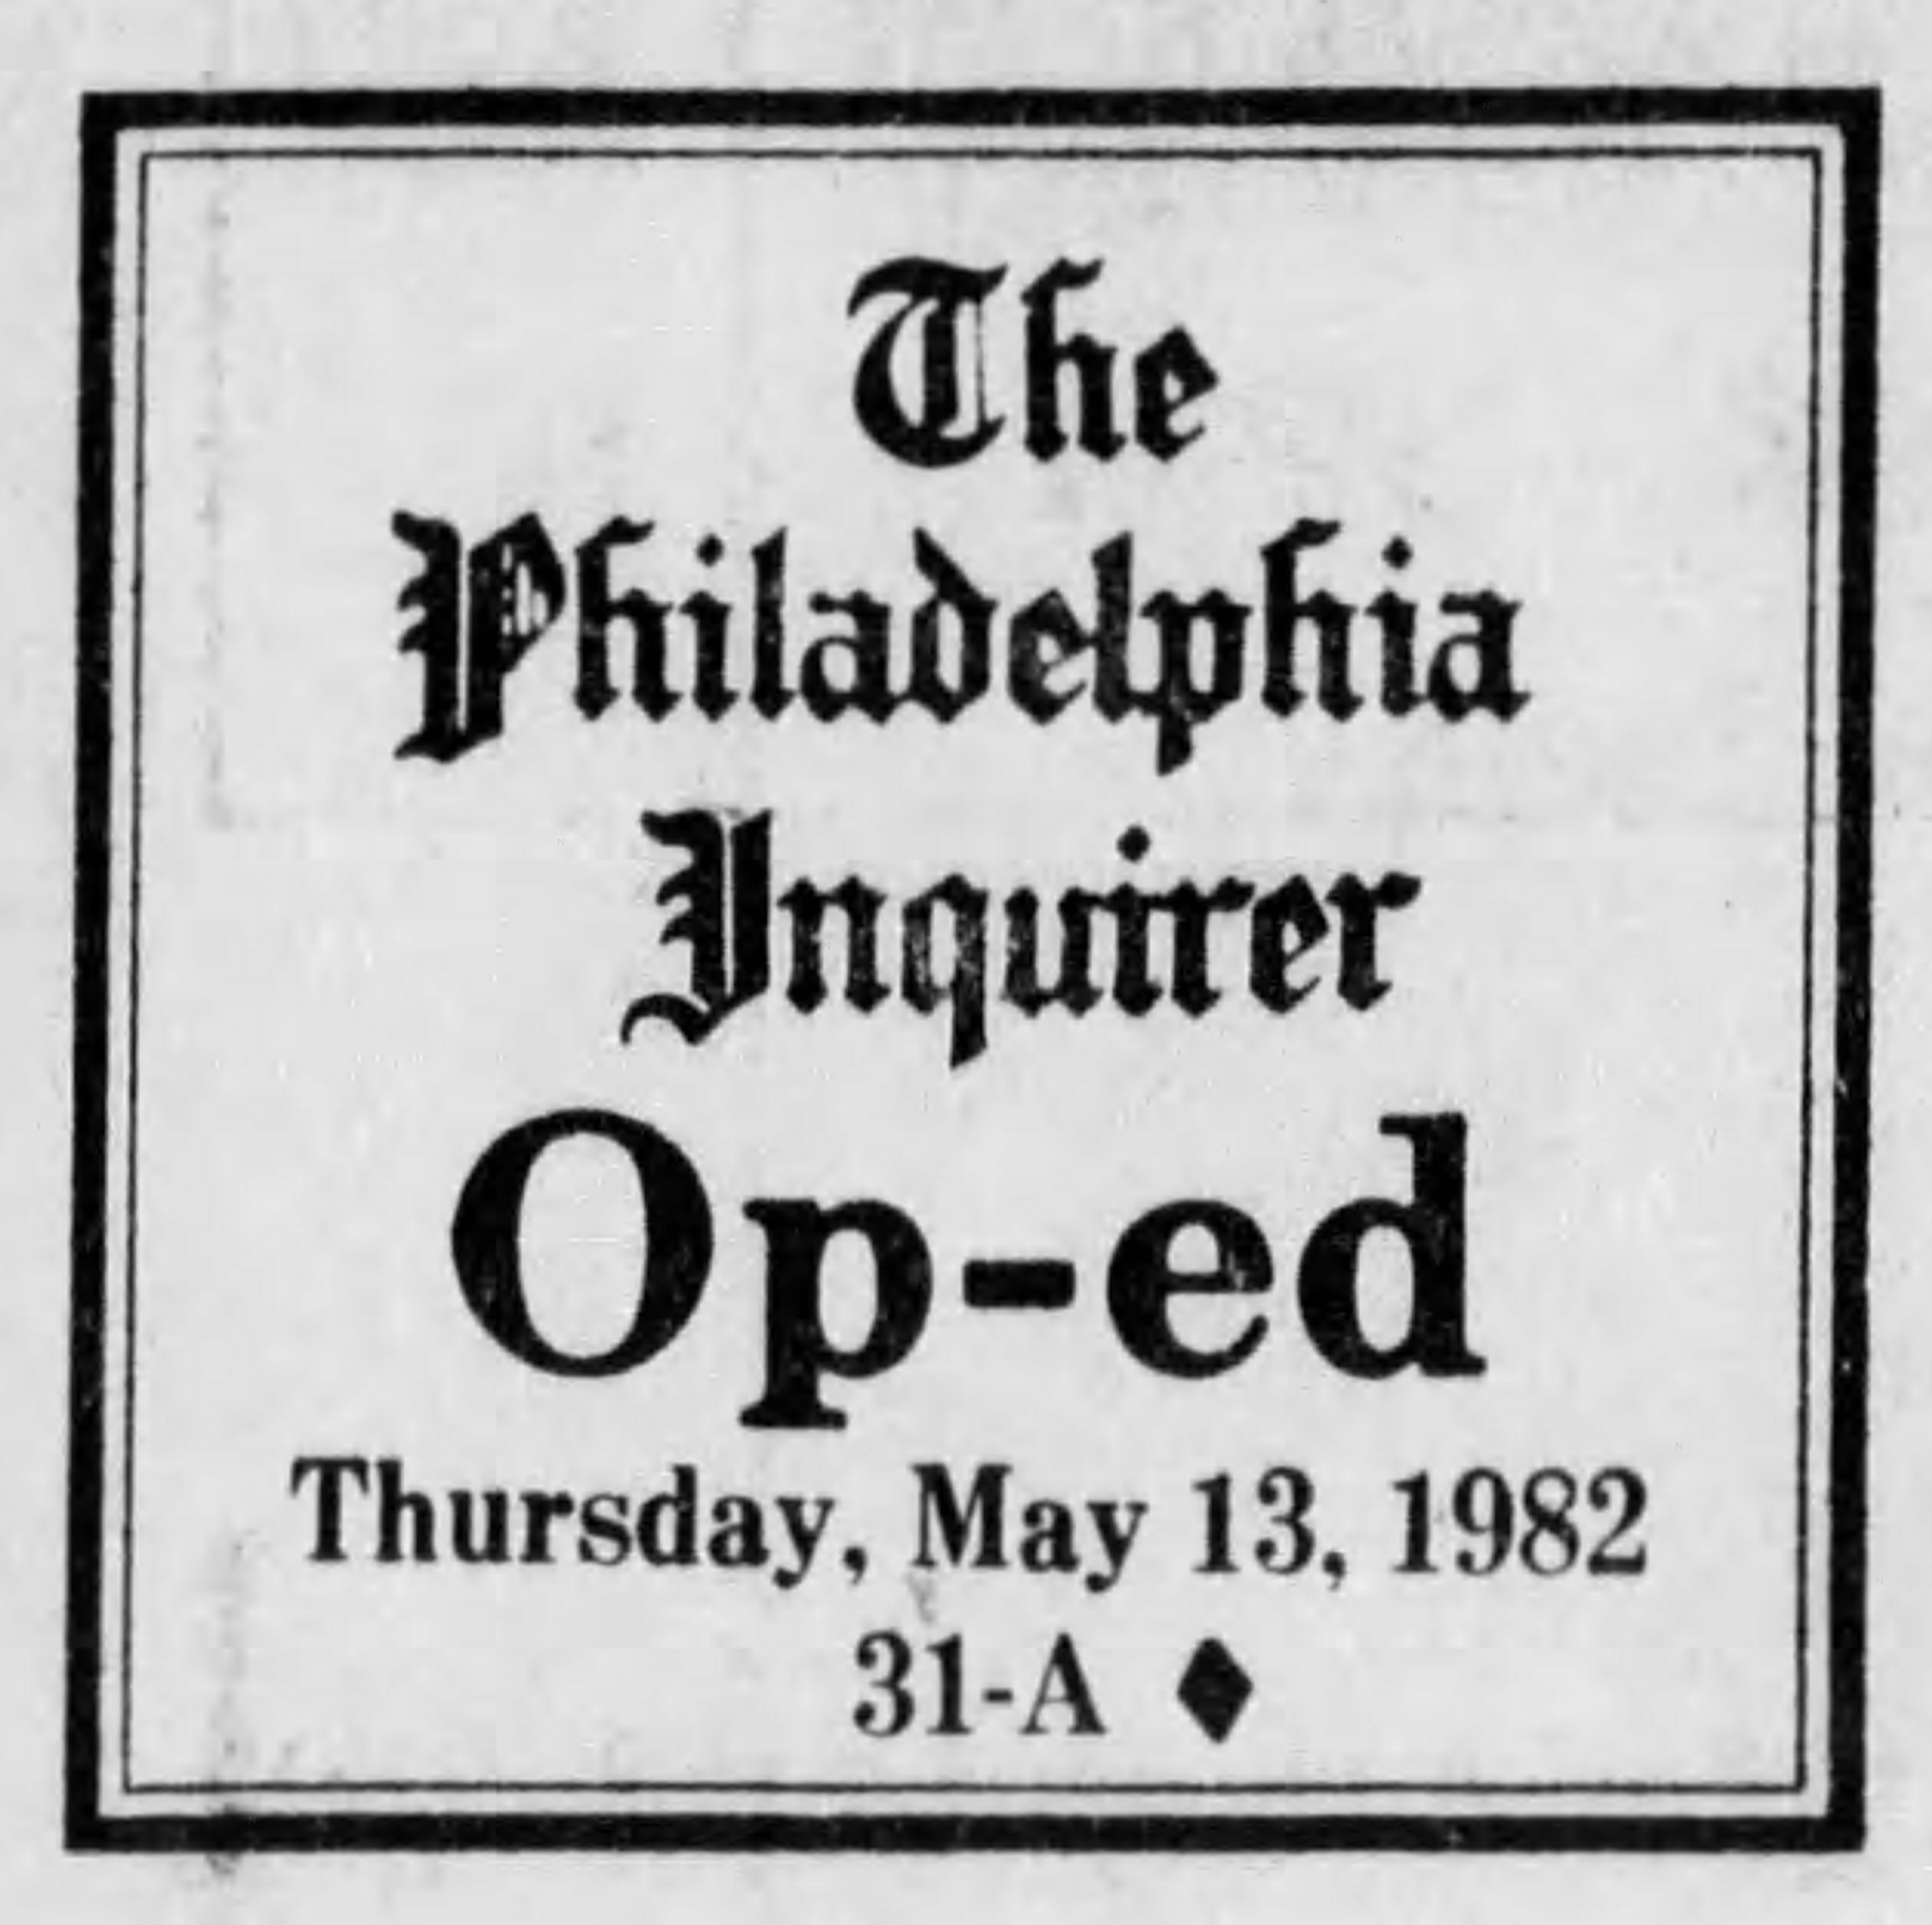 Philadelphia Inquirer Op Ed May 13, 1982